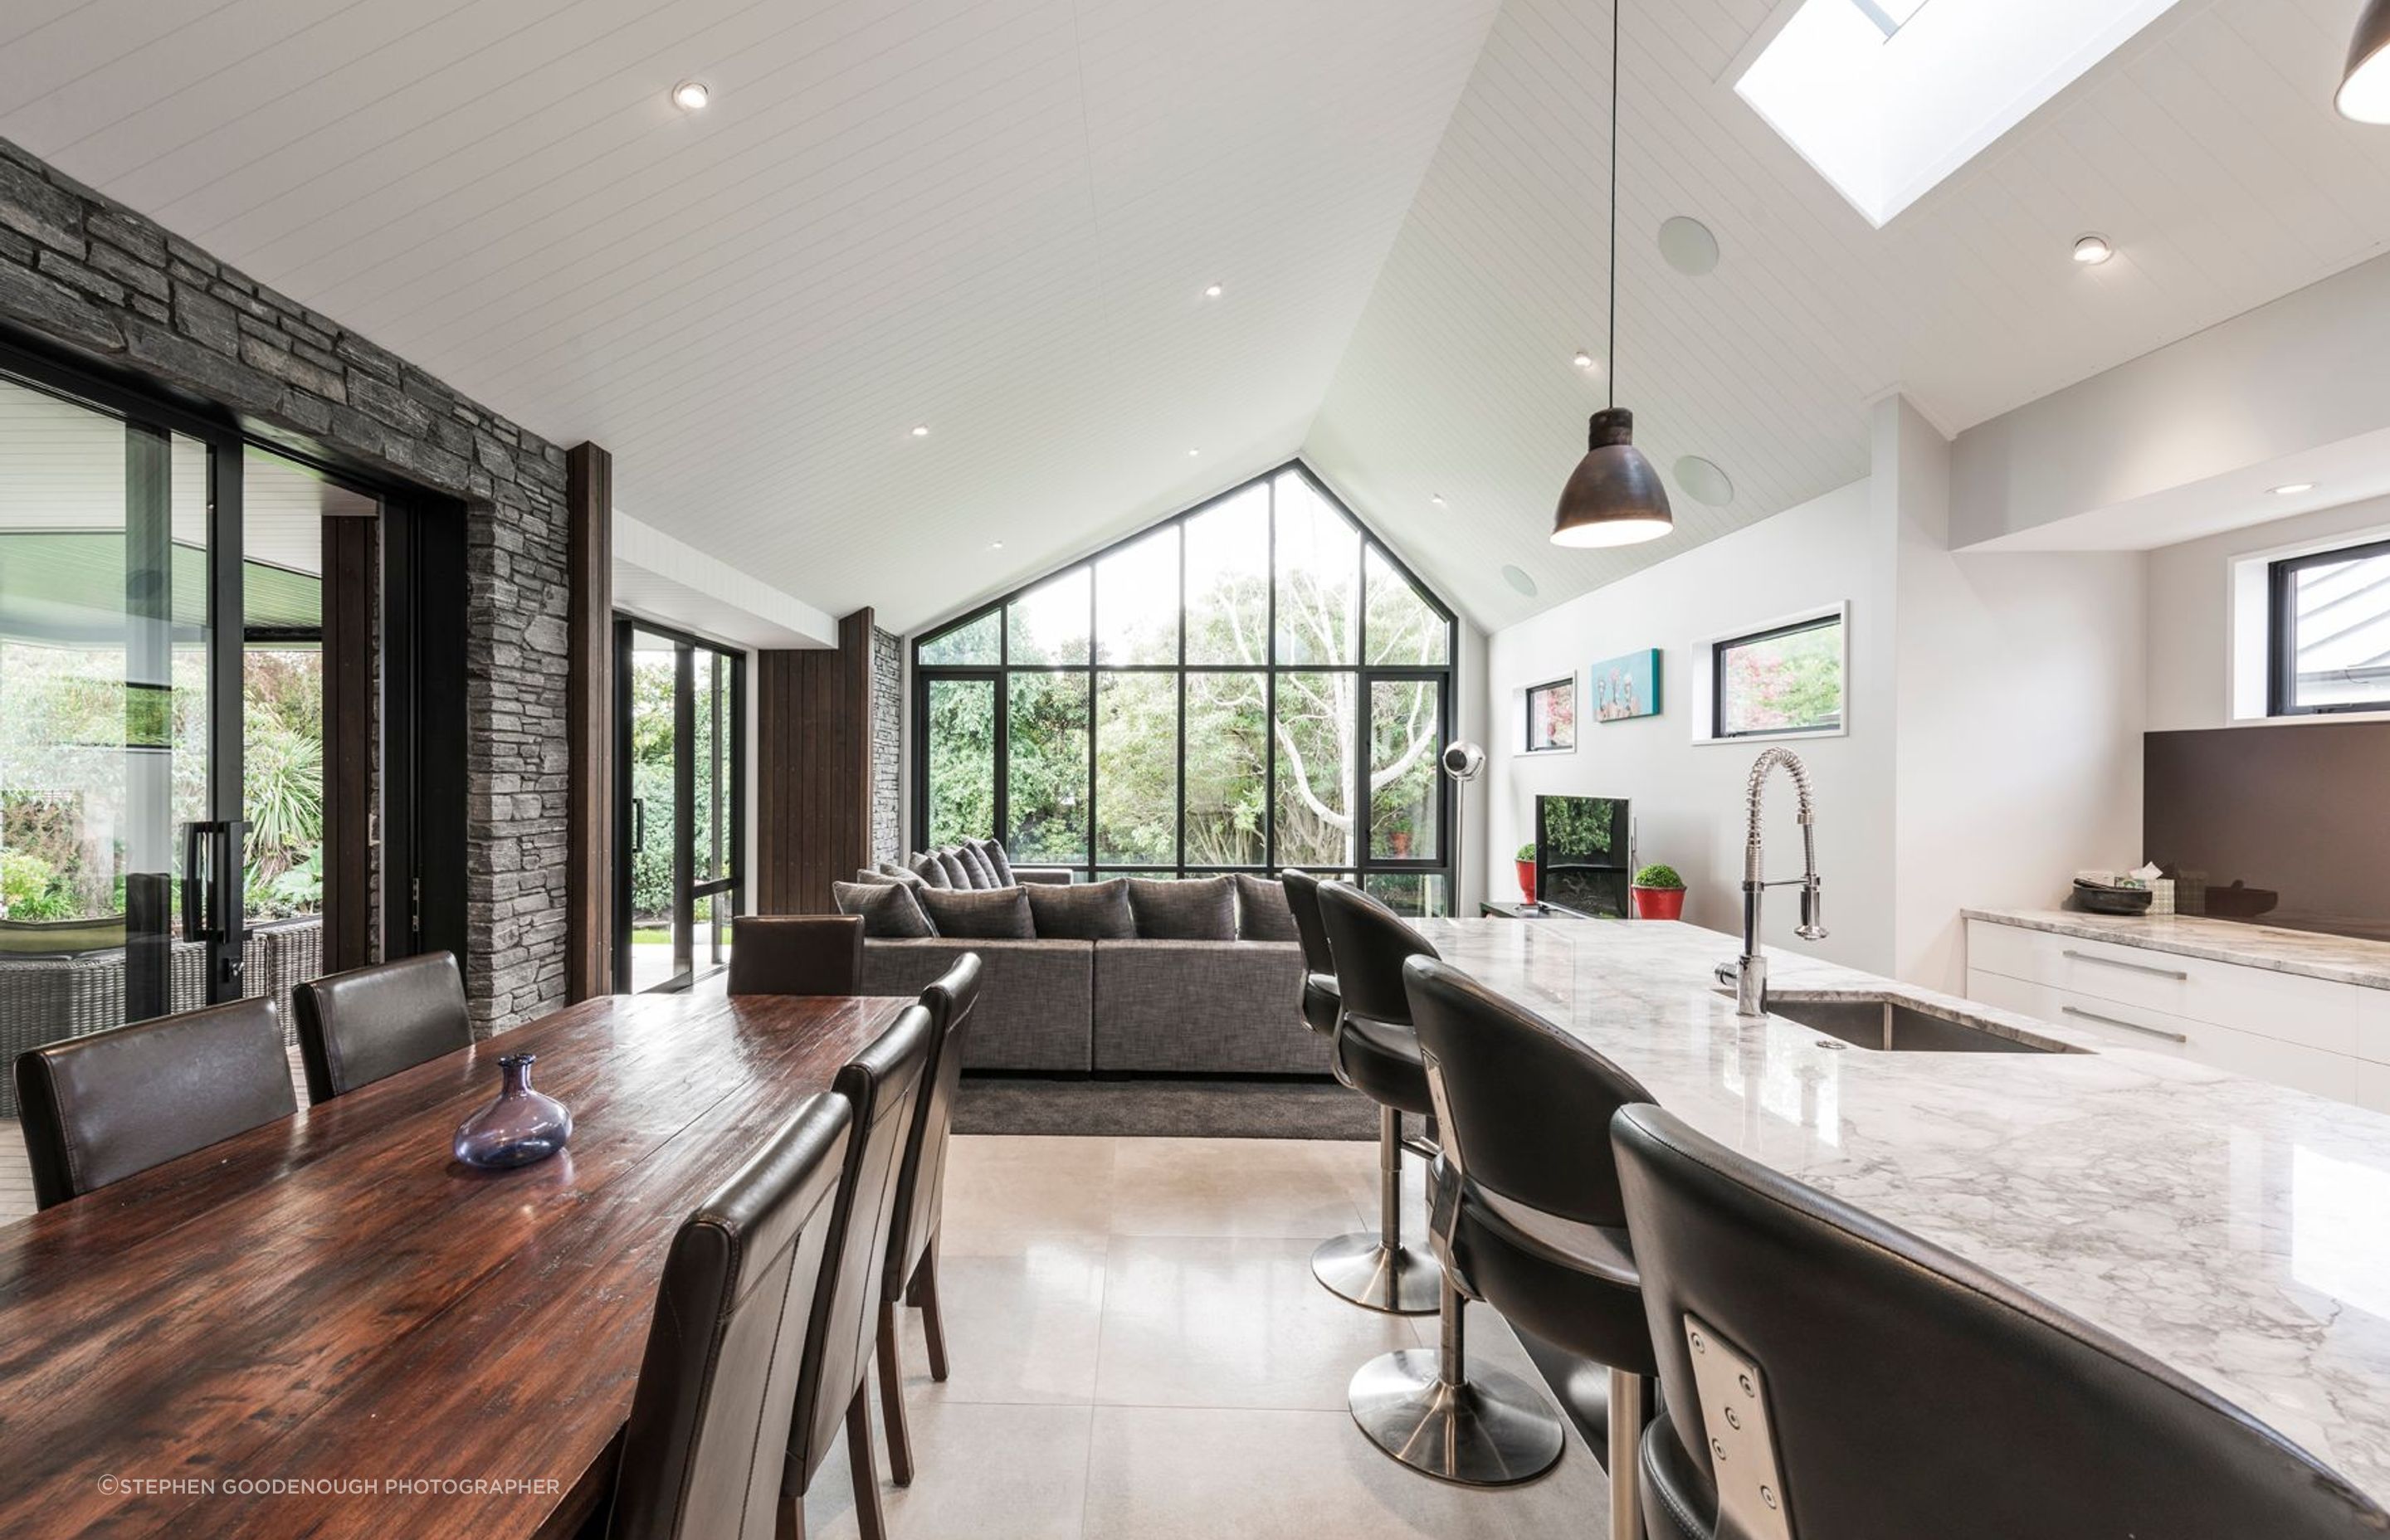 Through opening the sliders between the kitchen/dining space and the lounge to the left, and covered outdoor room, a large seamless space can be created when entertaining large groups.